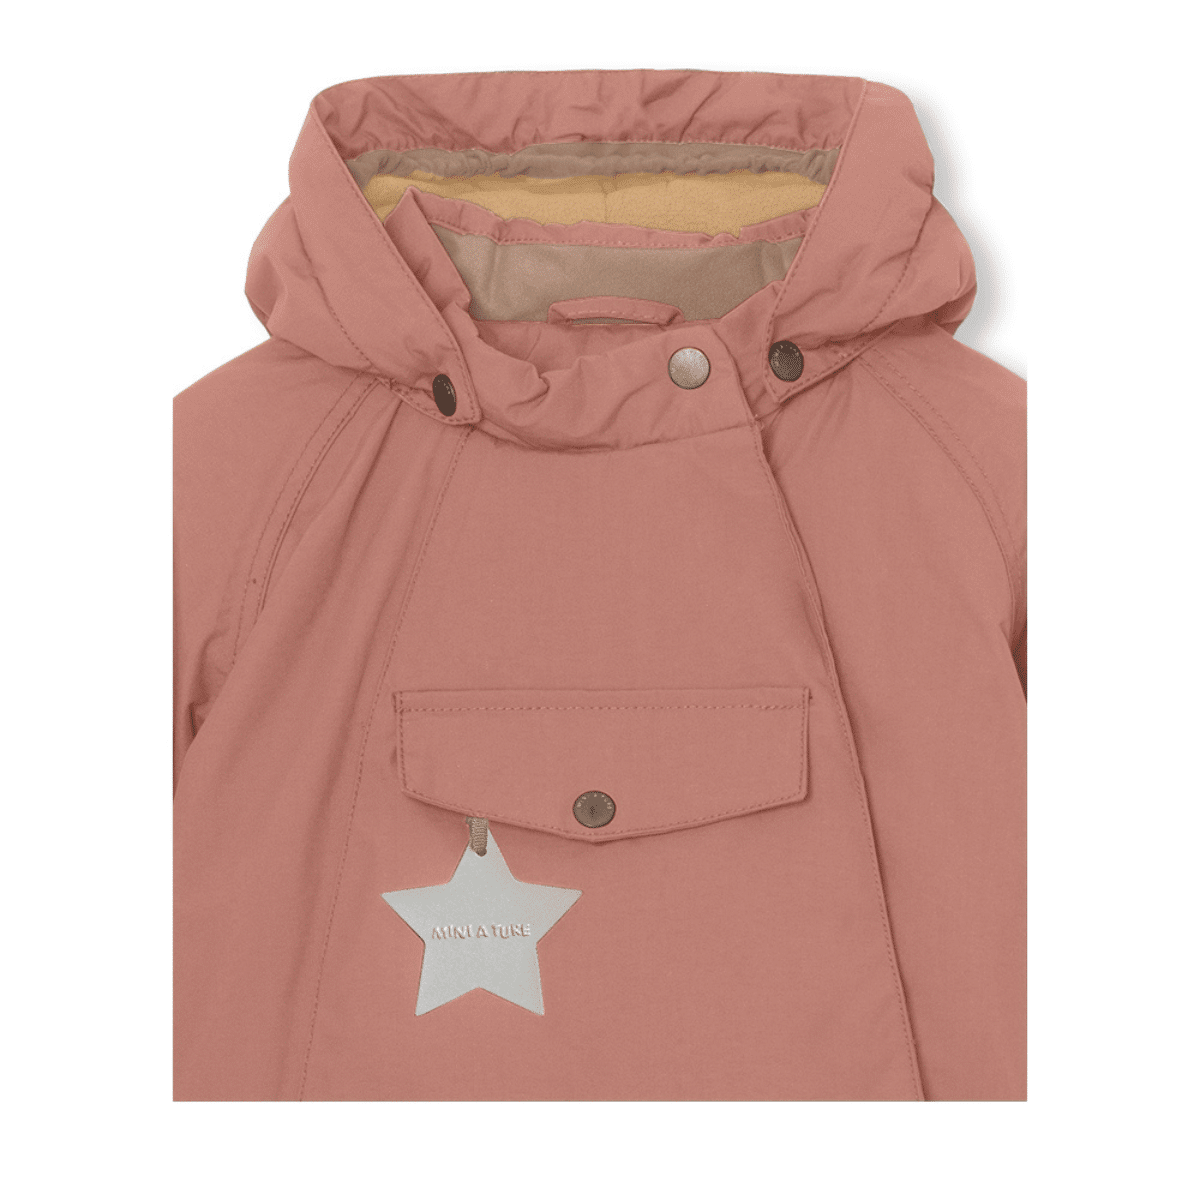 mini a ture pink kids winter coat side zip close up of star